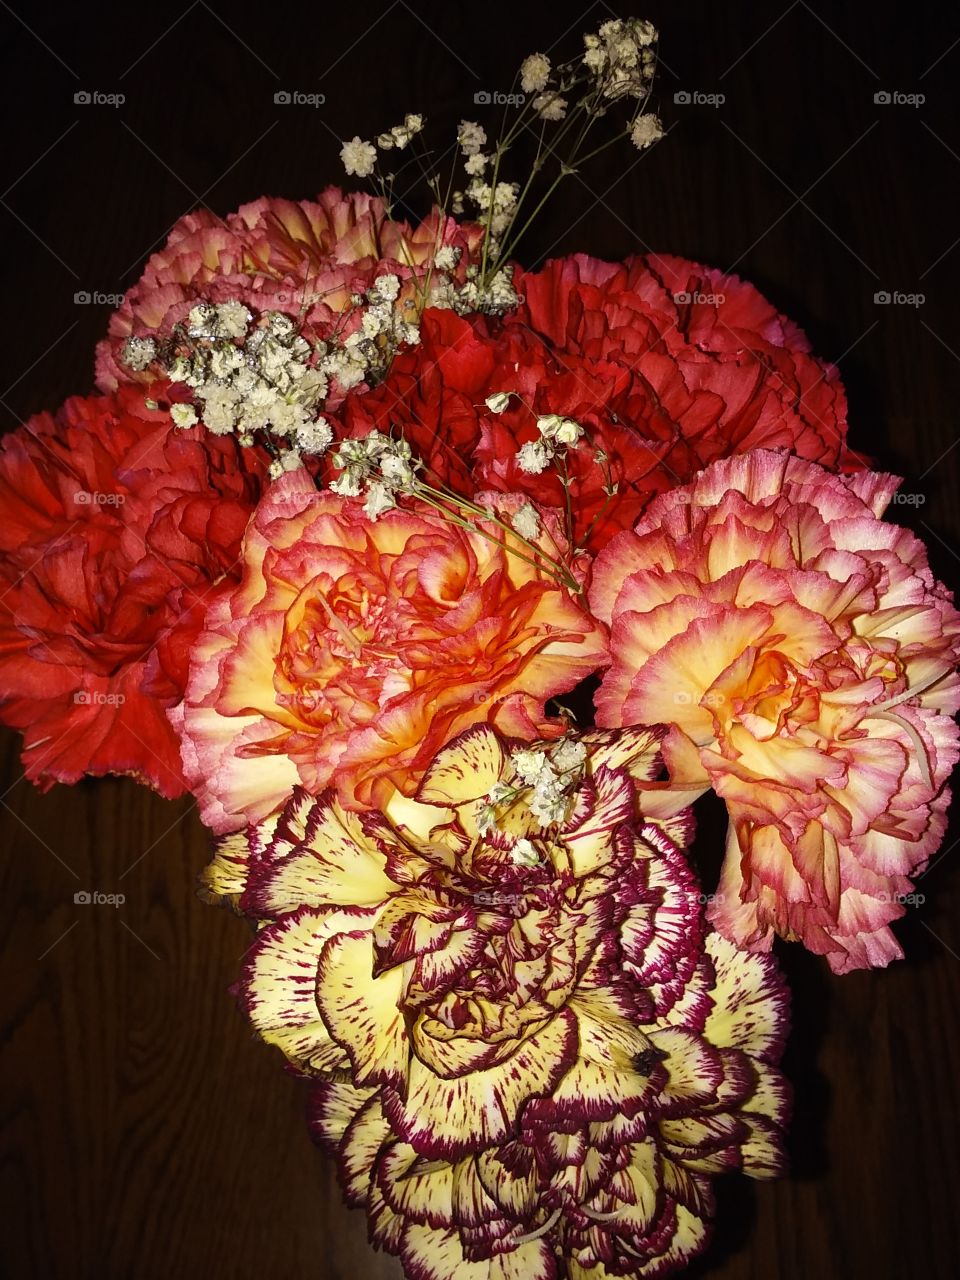 Bouquet of carnations for Valentine's Day!